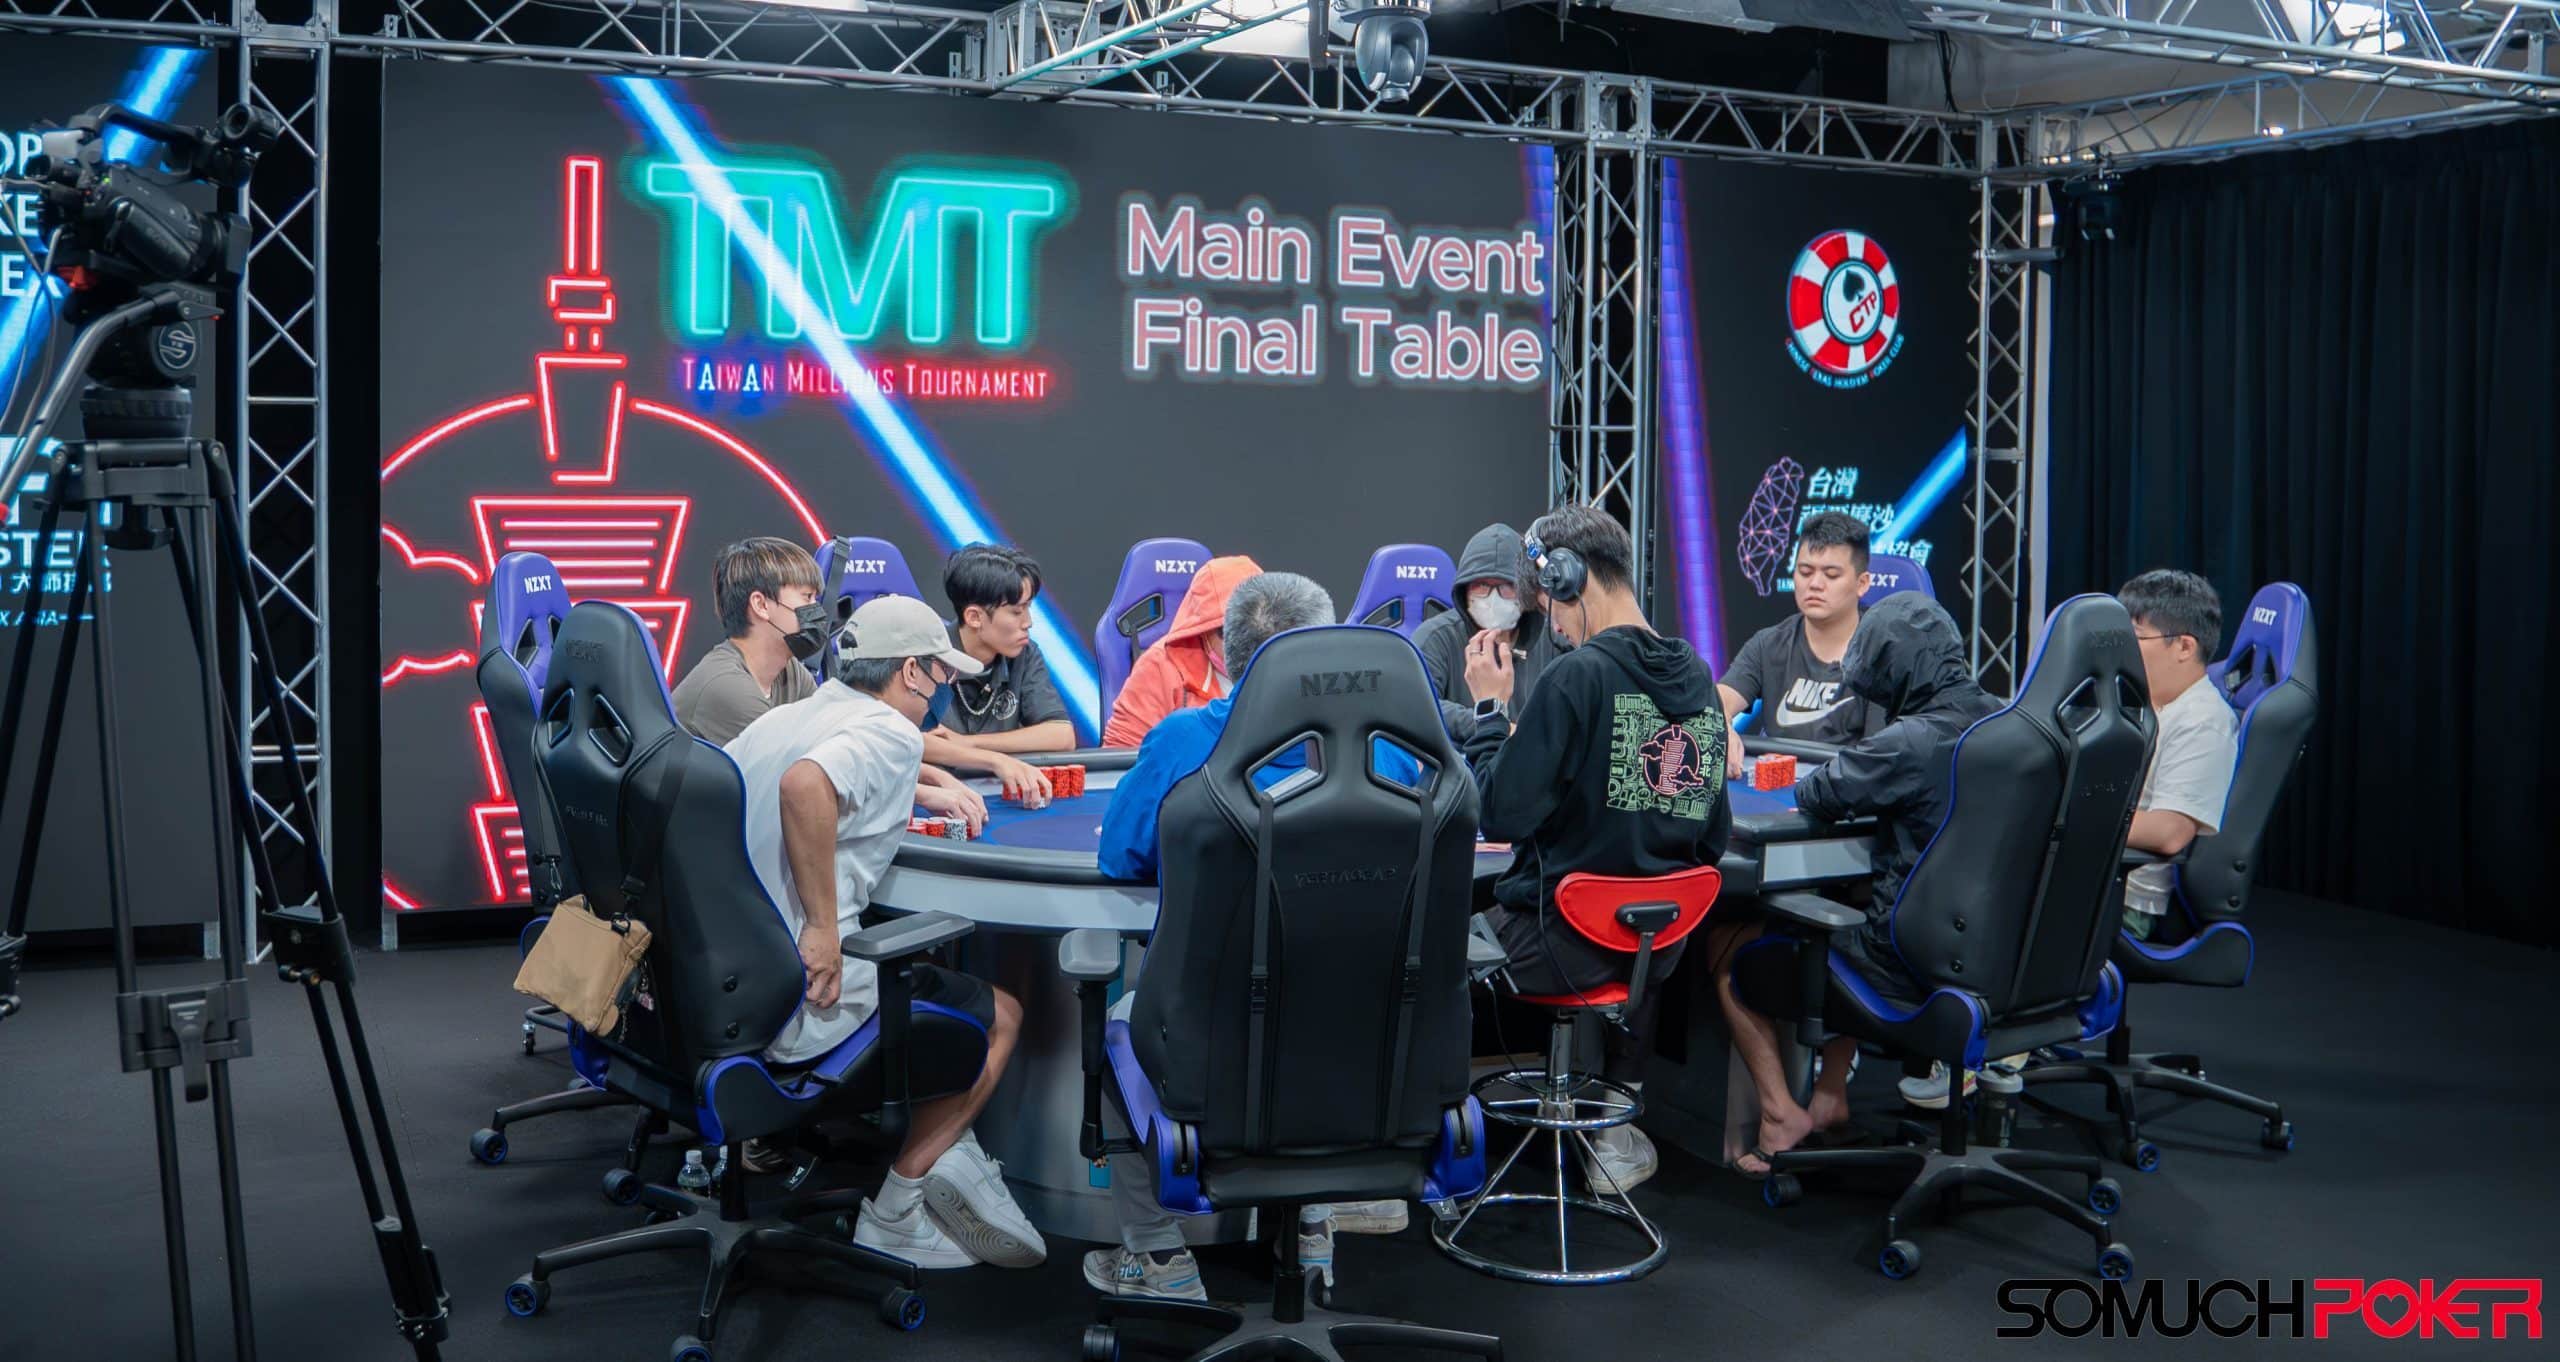 Taiwan Millions Tournament 14 record MAIN EVENT race to the crown and six figure top prize underway - Asia Poker Arena, Taipei City